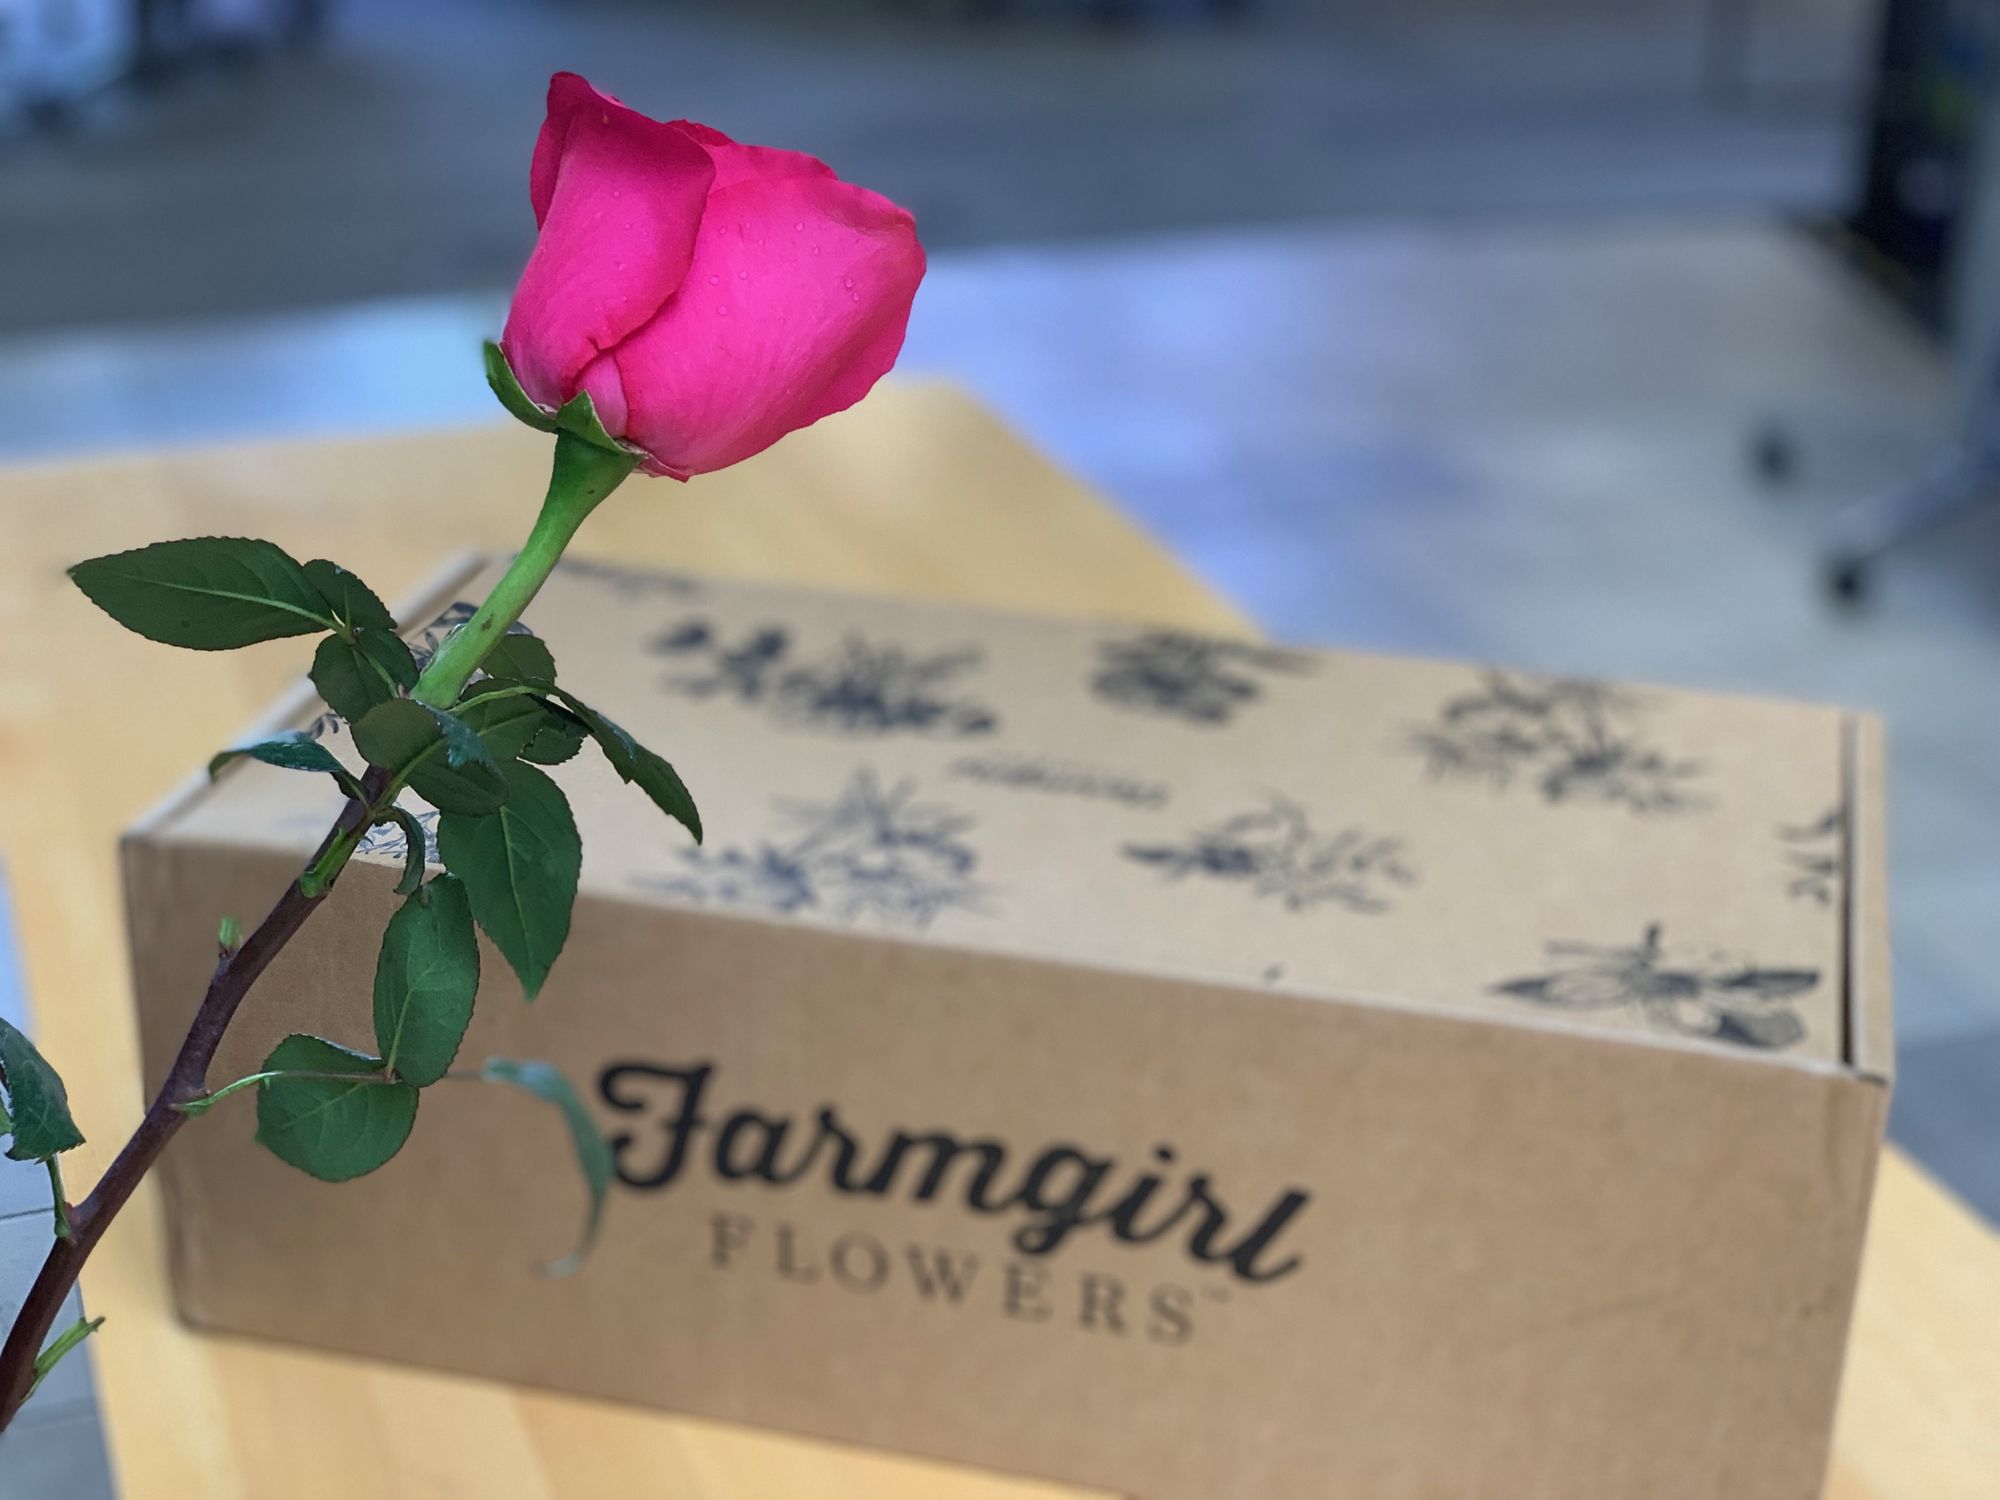 Pink rose in front of Farmgirl box